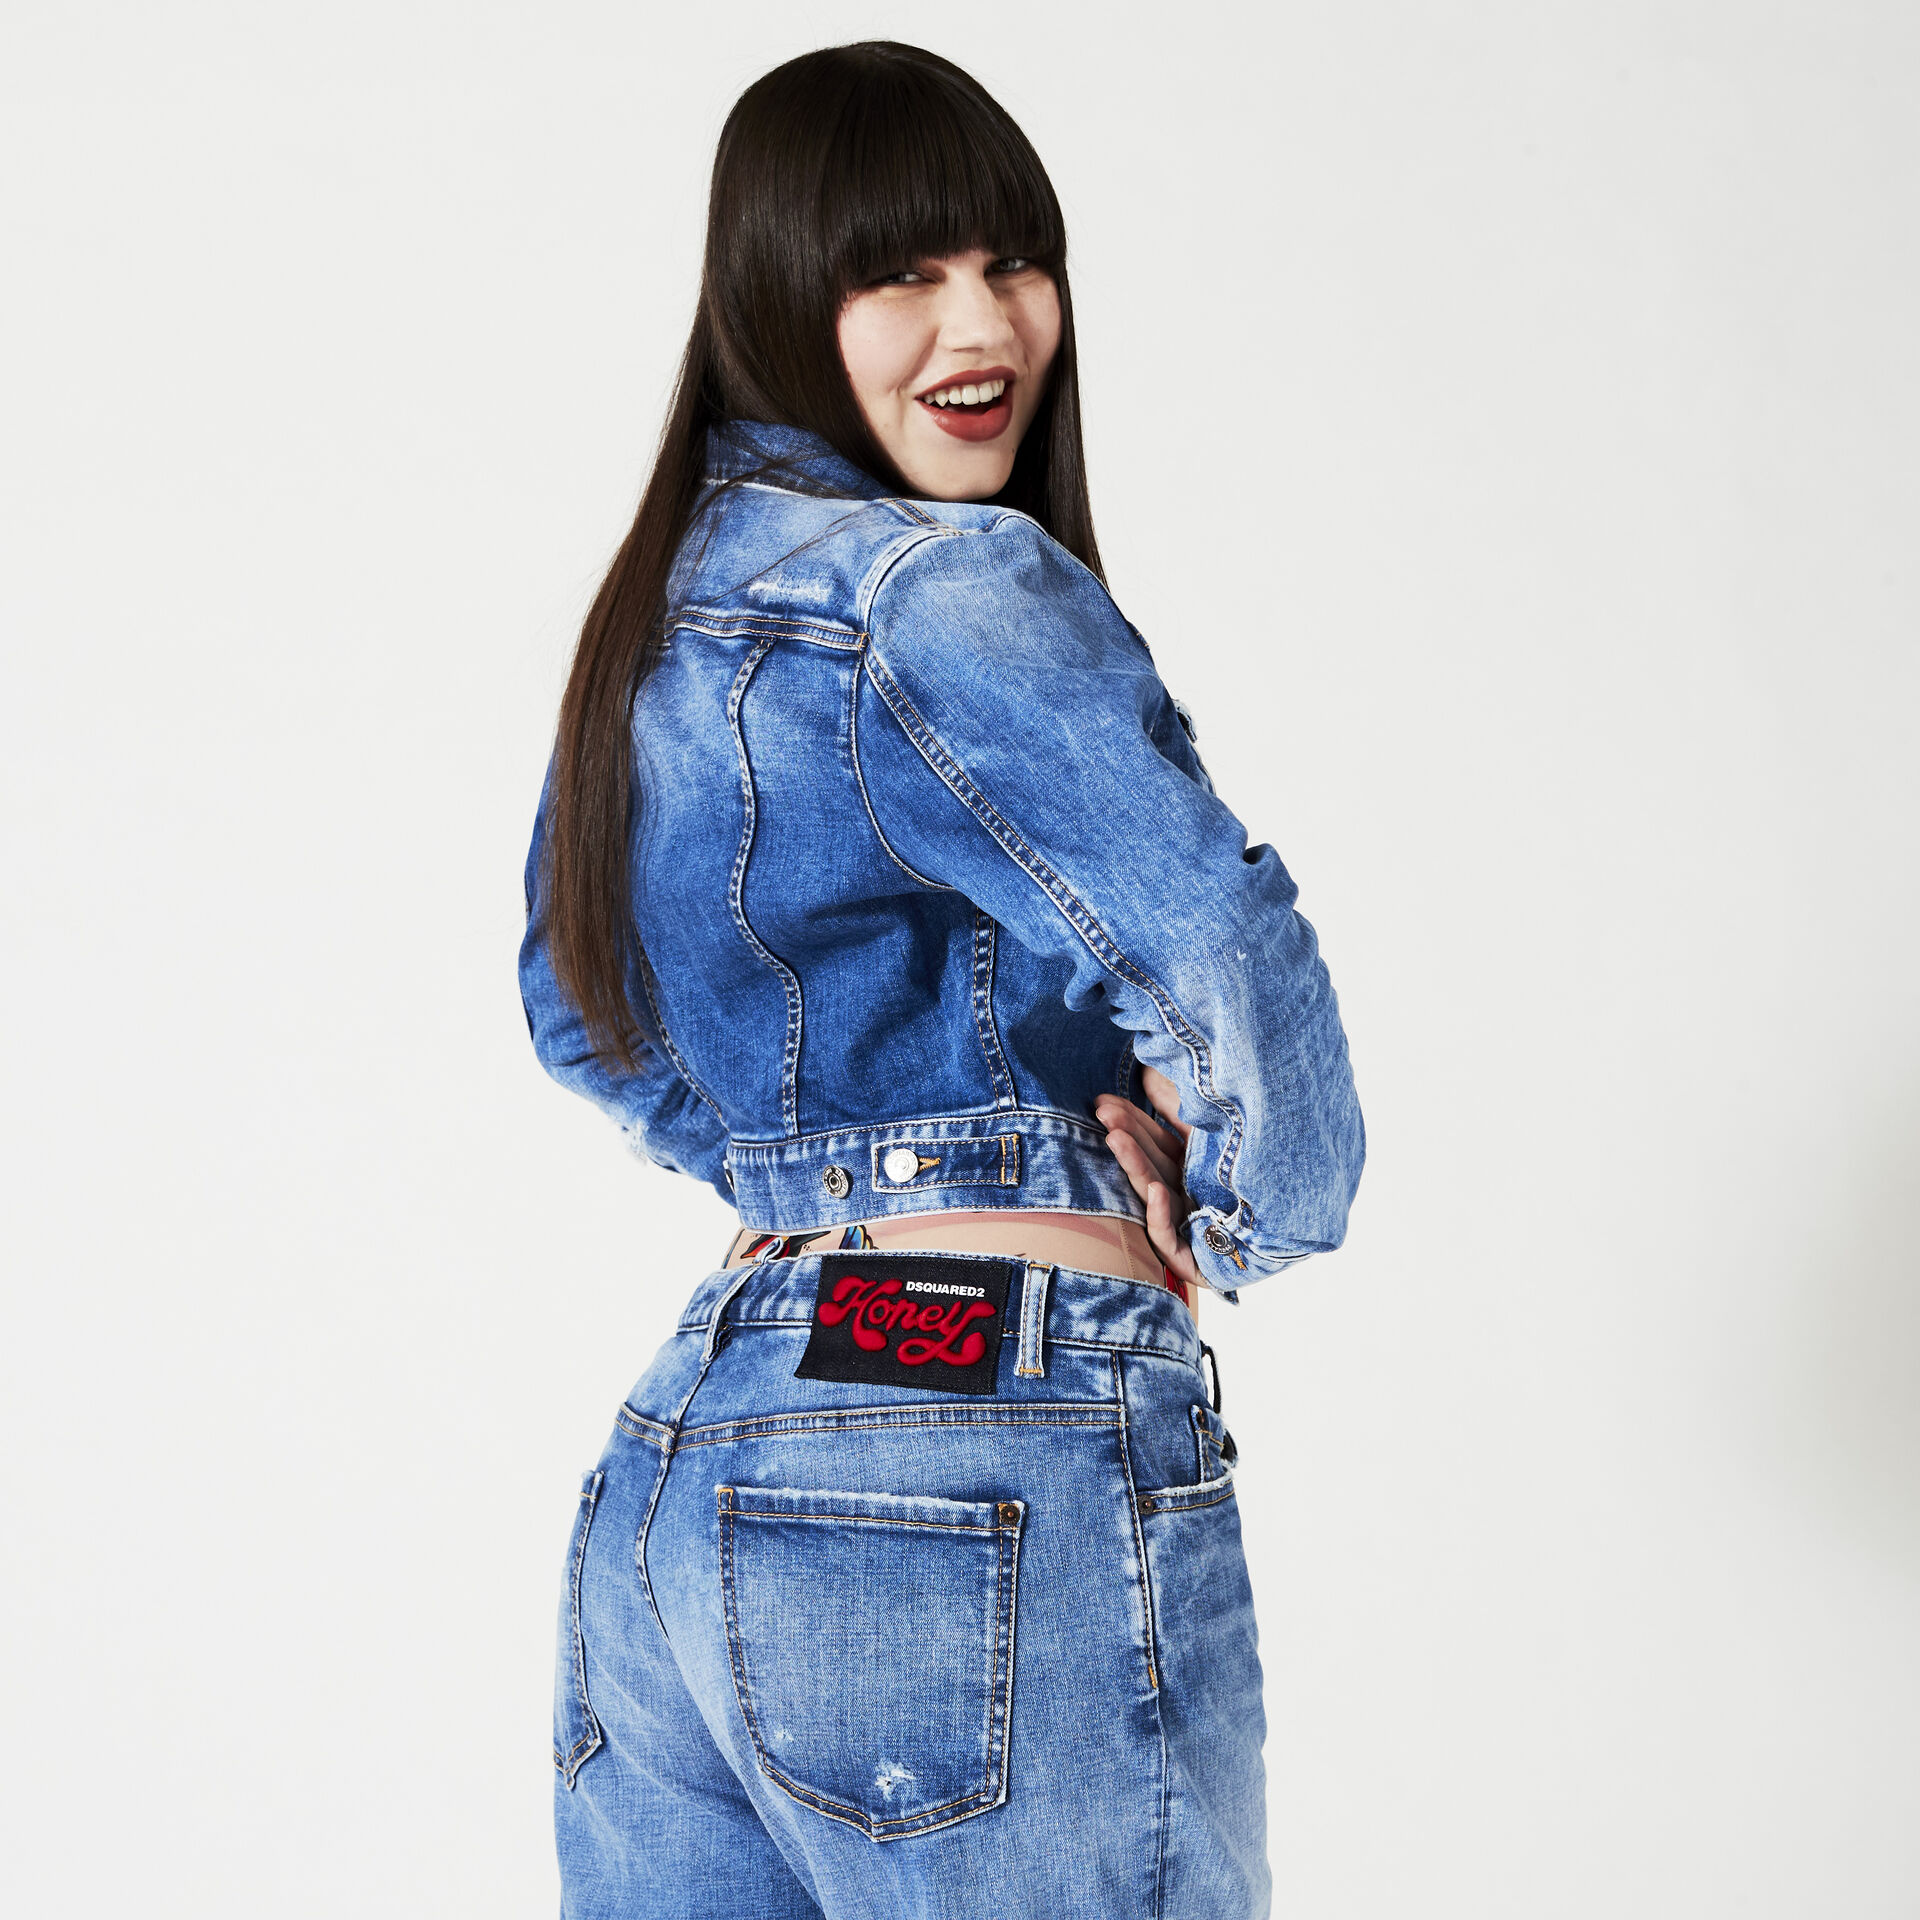 Woman with long brunette hair wearing a denim jacket and light blue jeans